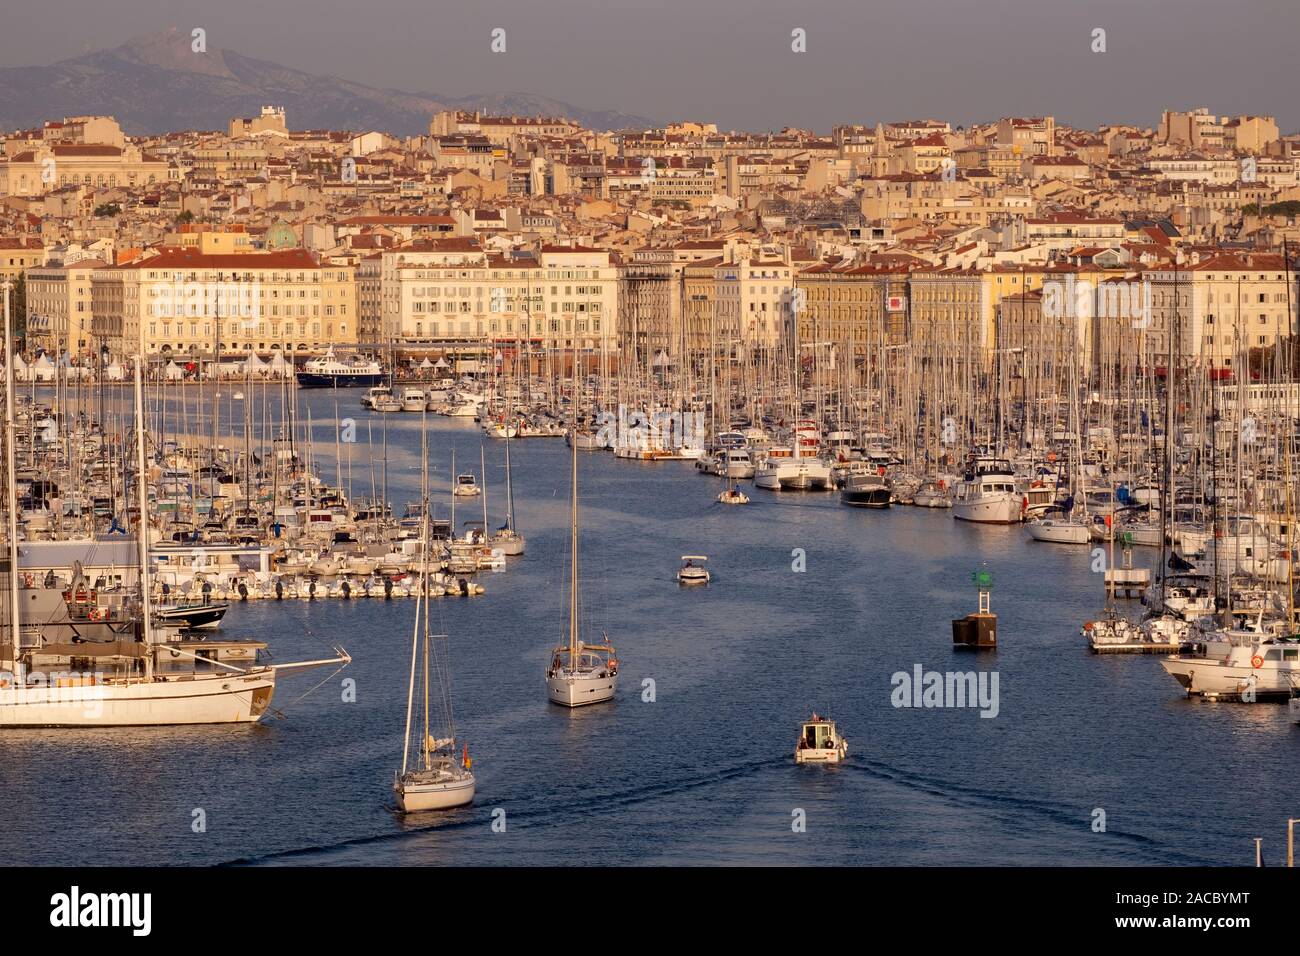 The Old Port of Marseille / Vieux-Port de Marseille, Provence, France, Europe Stock Photo